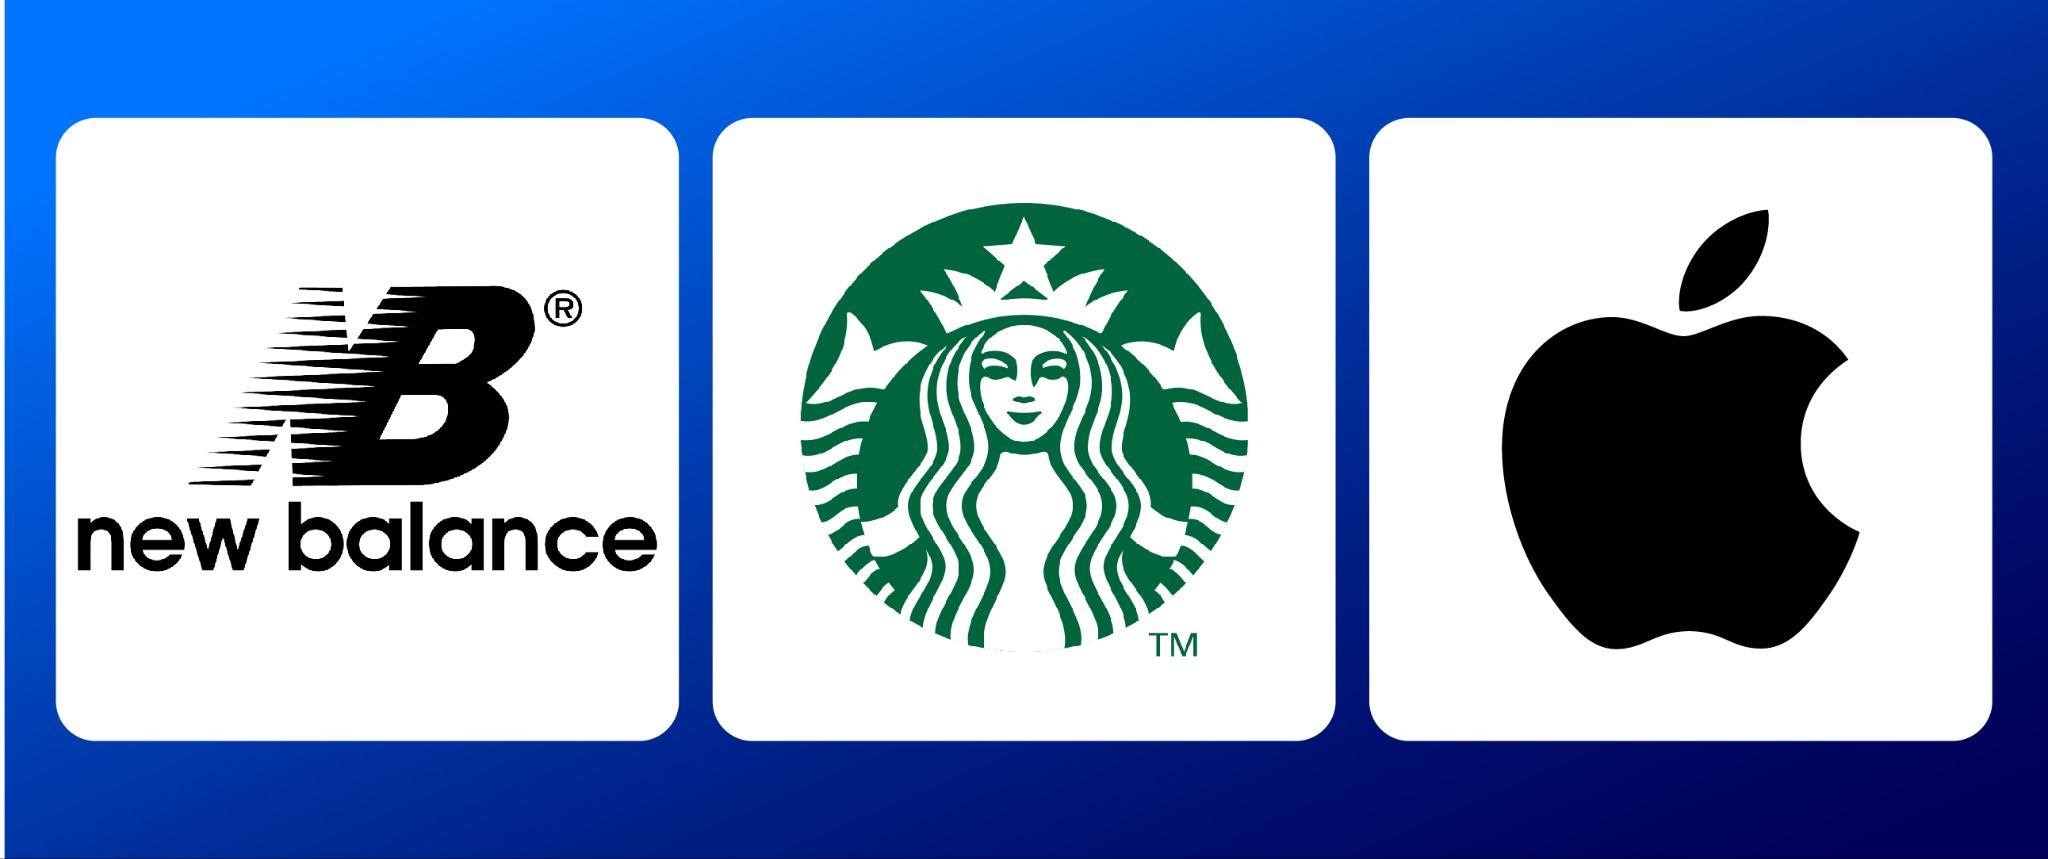 different examples of name-brand trademarks